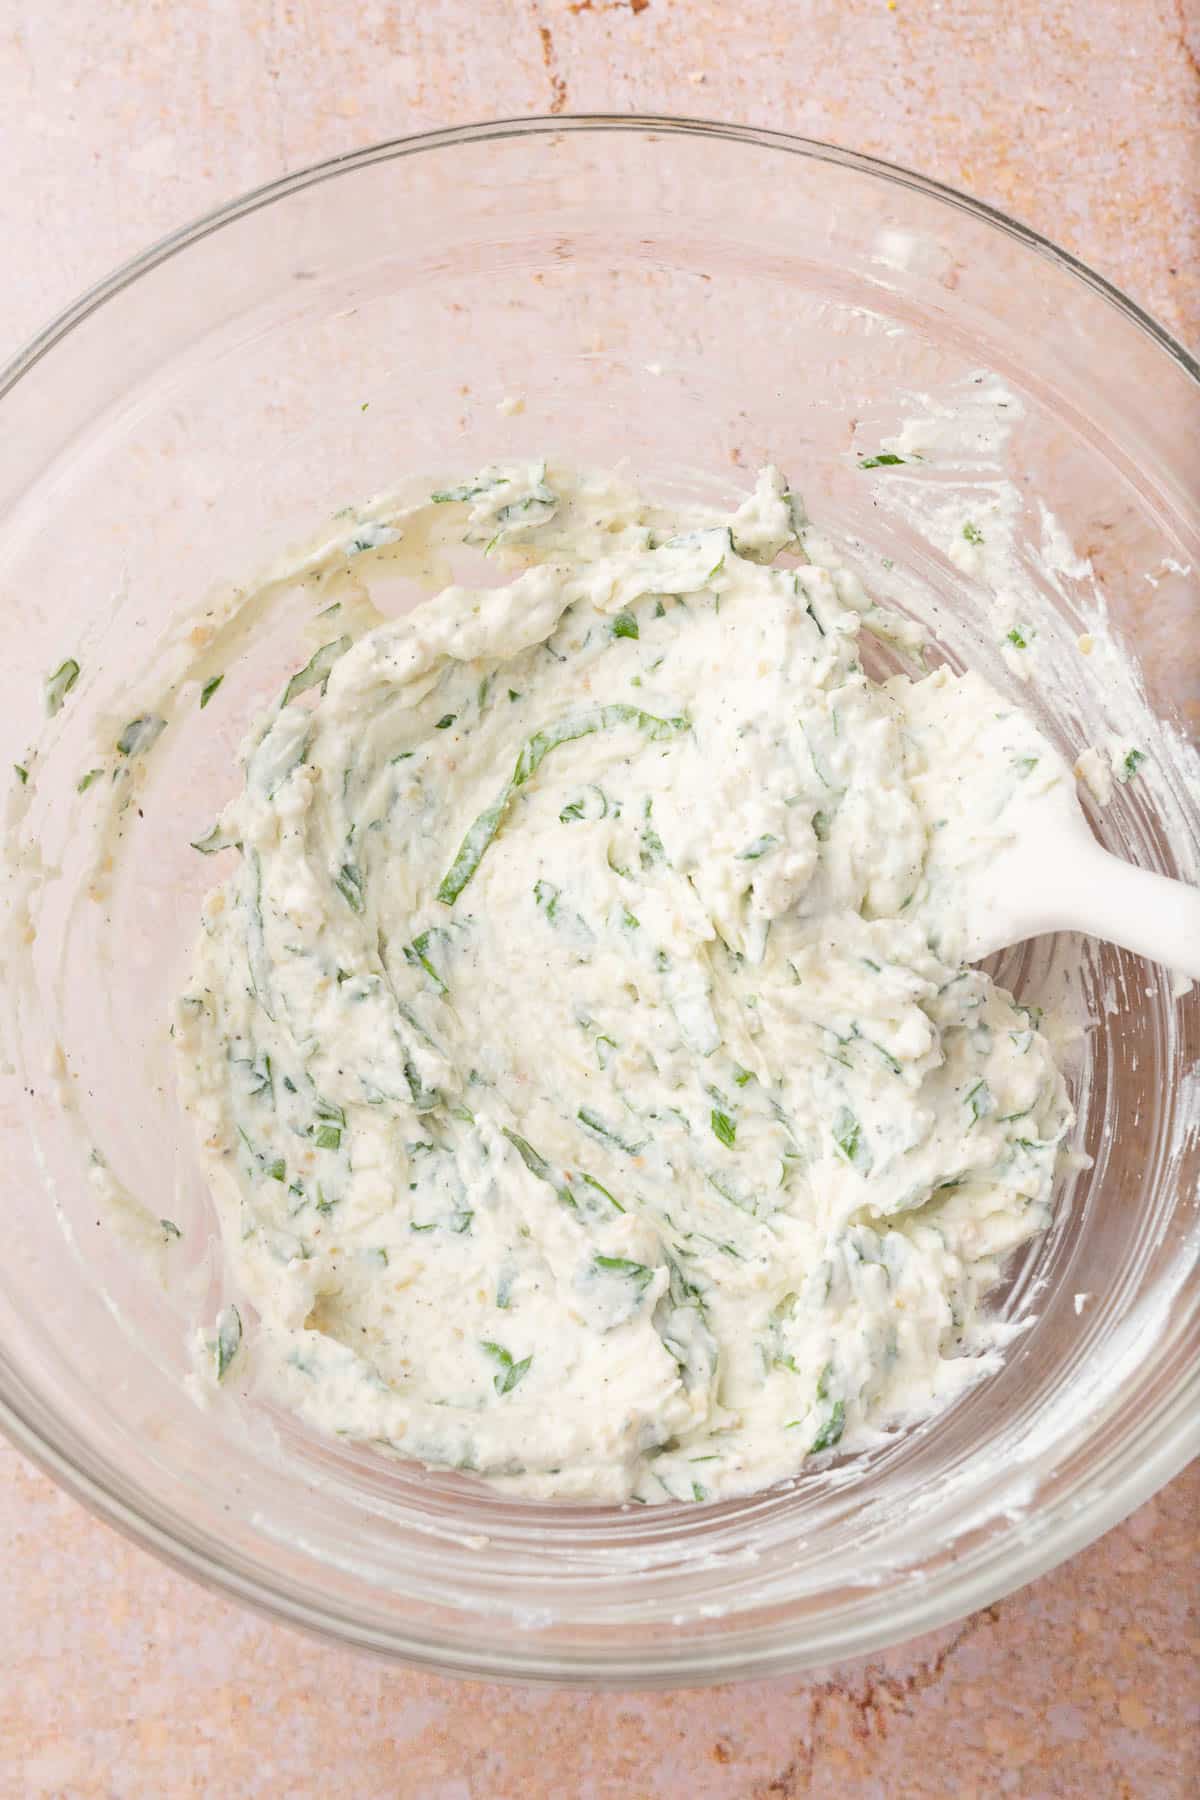 A glass mixing bowl of ricotta cheese and fresh herbs that have been mixed together with a rubber spatula.